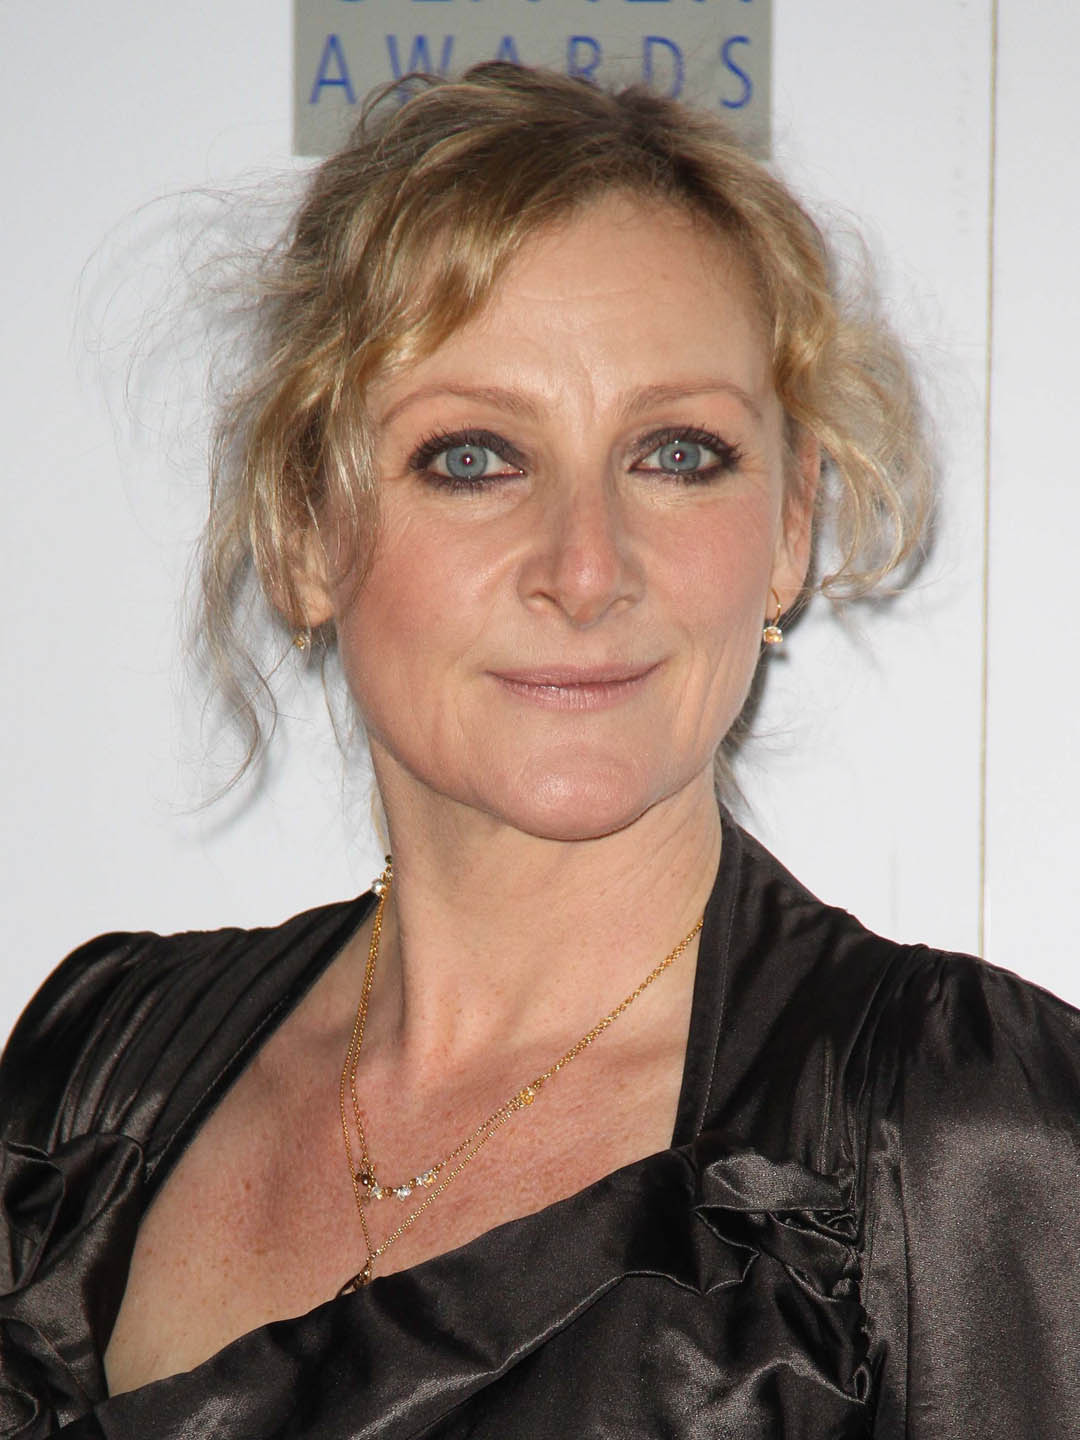 How tall is Lesley Sharp?